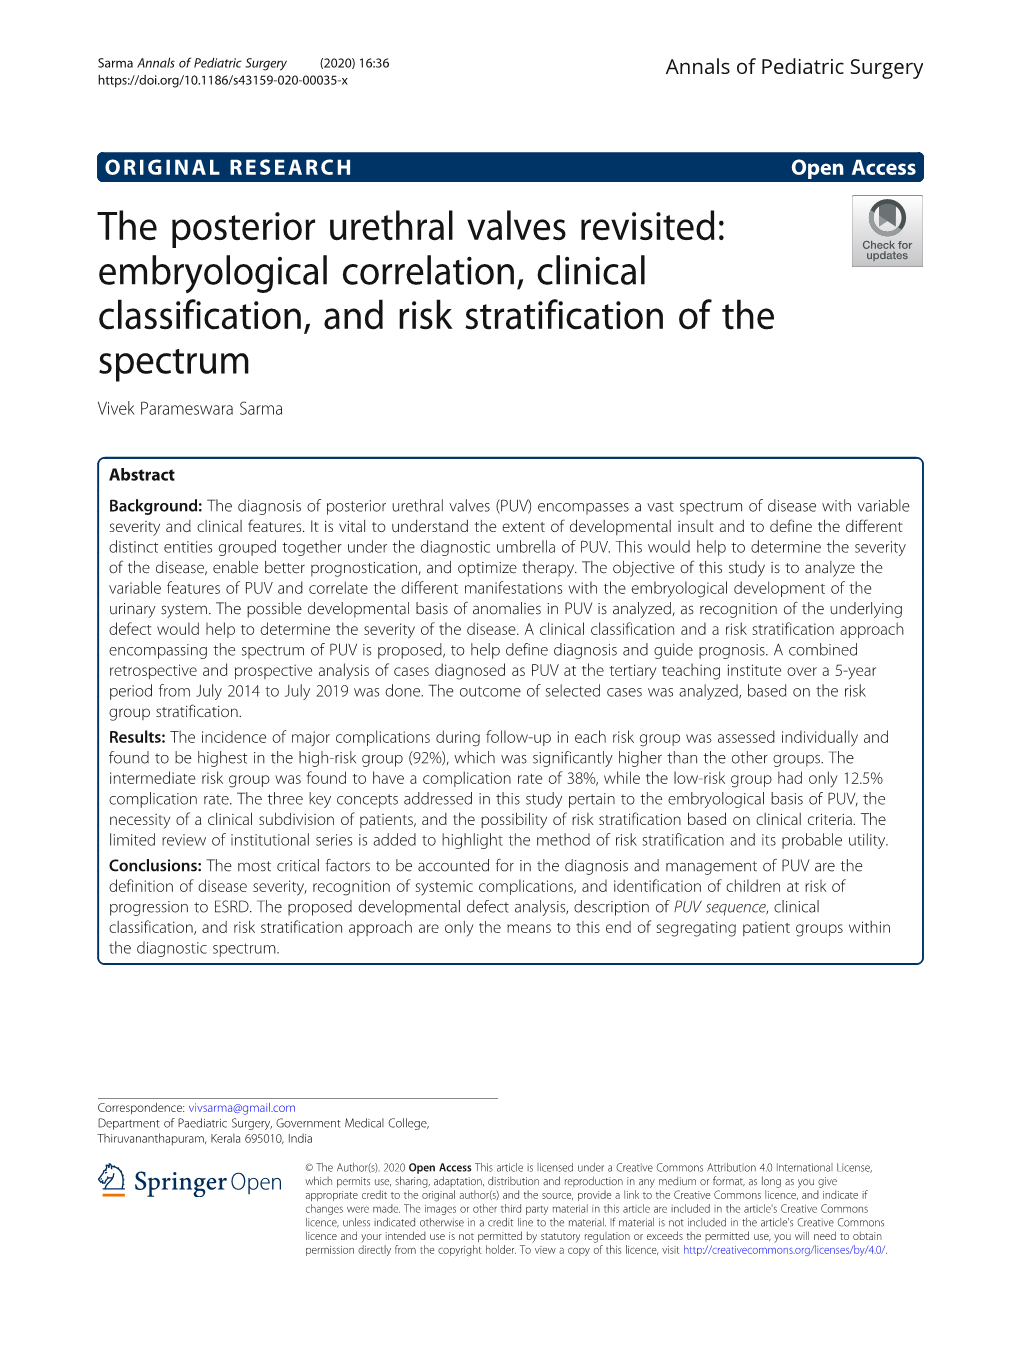 The Posterior Urethral Valves Revisited: Embryological Correlation, Clinical Classification, and Risk Stratification of the Spectrum Vivek Parameswara Sarma